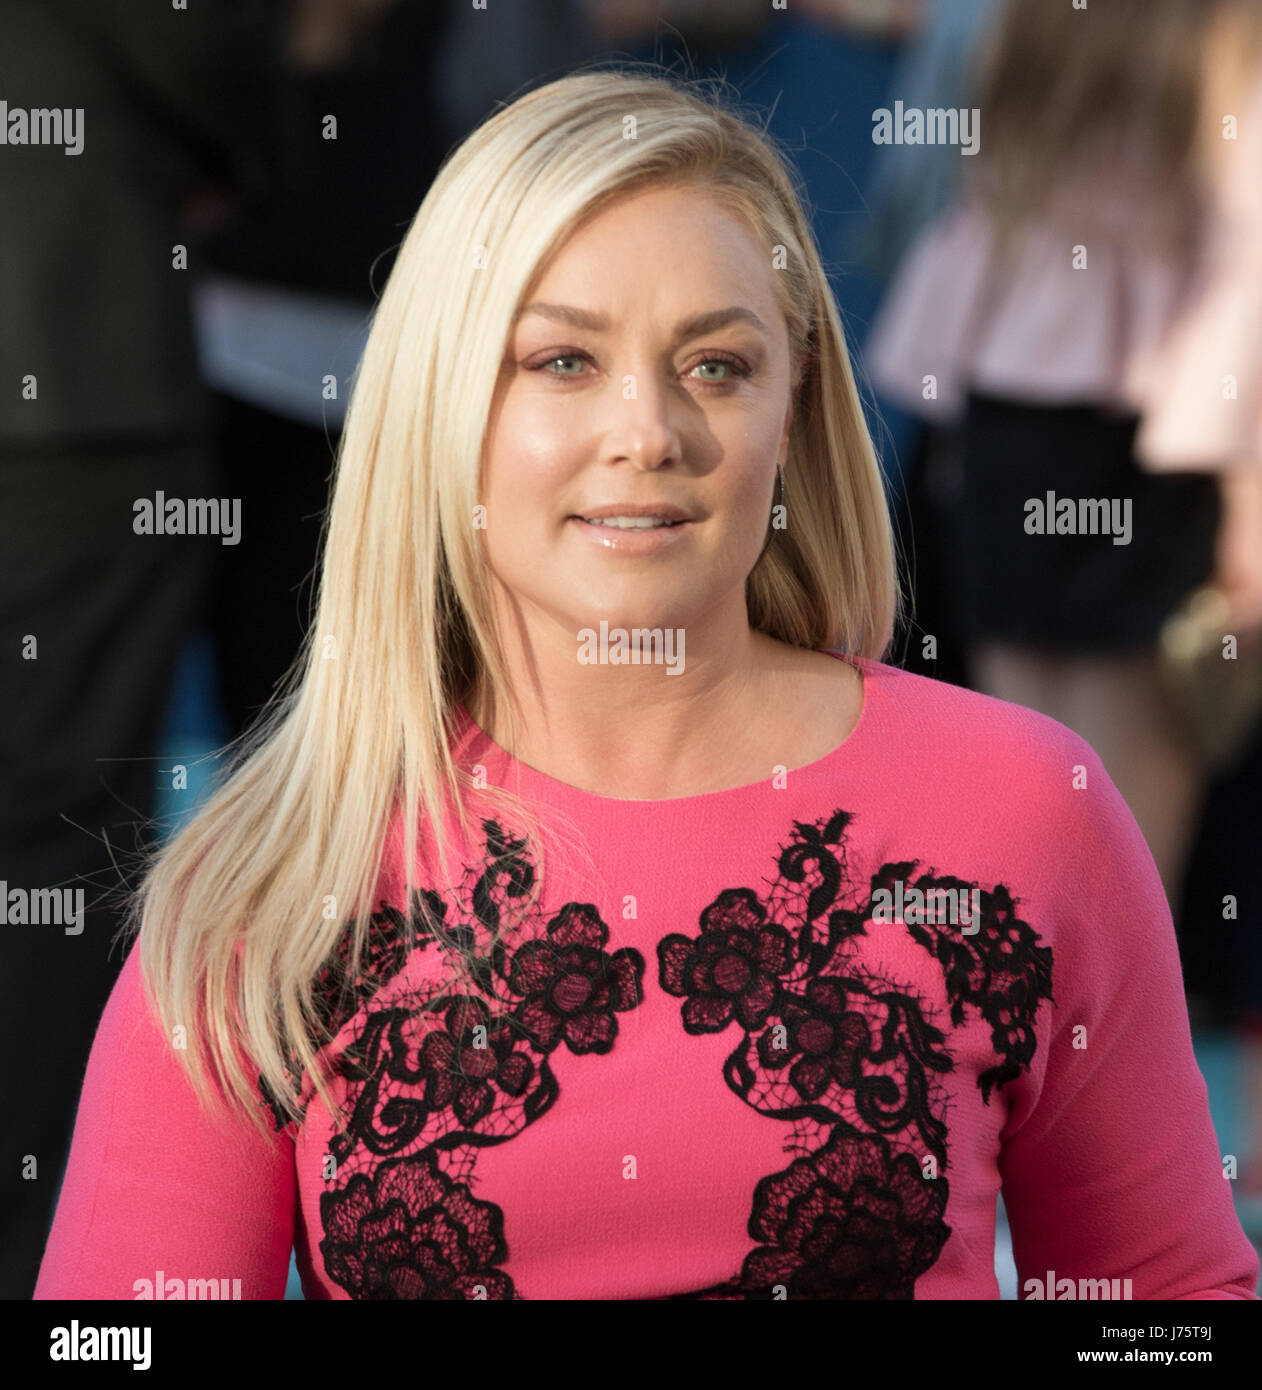 Elisabeth Röhm attends the premiere of Disney's 'Pirates Of The Caribbean: Dead Men Tell No Tales' at Dolby Theatre on May 18, 2017 in Hollywood, California Stock Photo